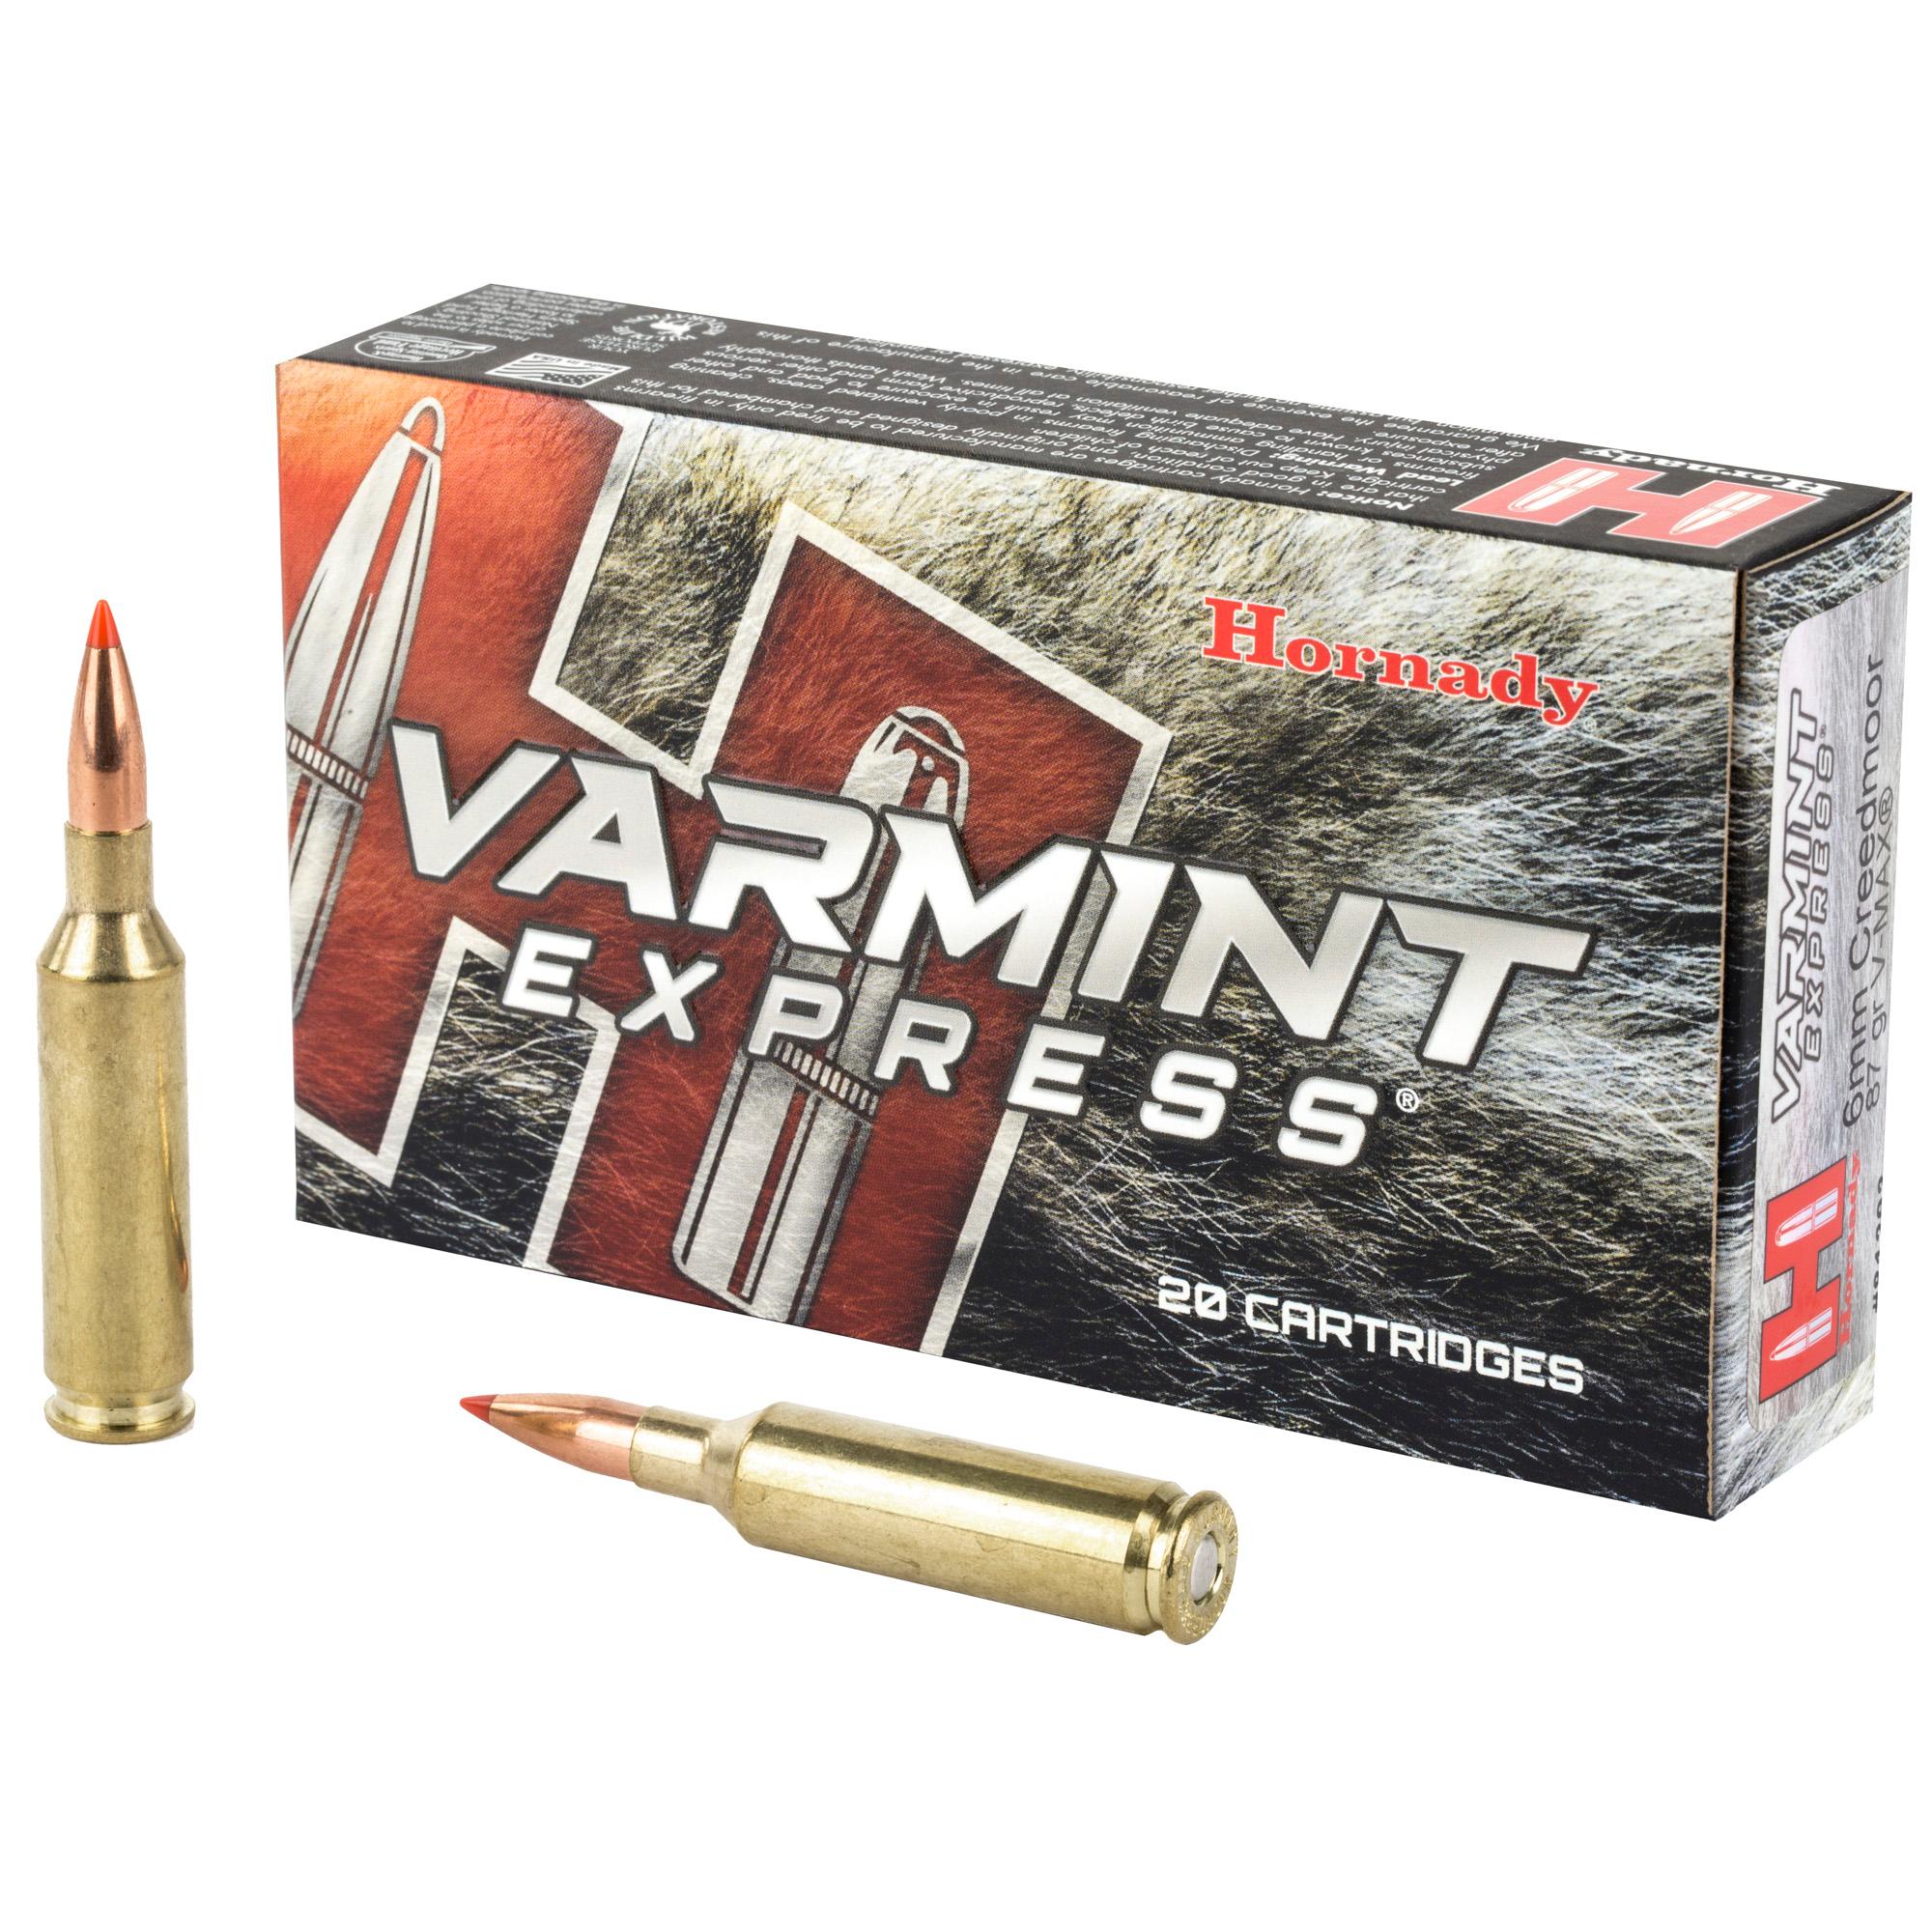 Rifle Ammunition HRNDY 6MM CRED 87GR VMAX 20/200 image 1